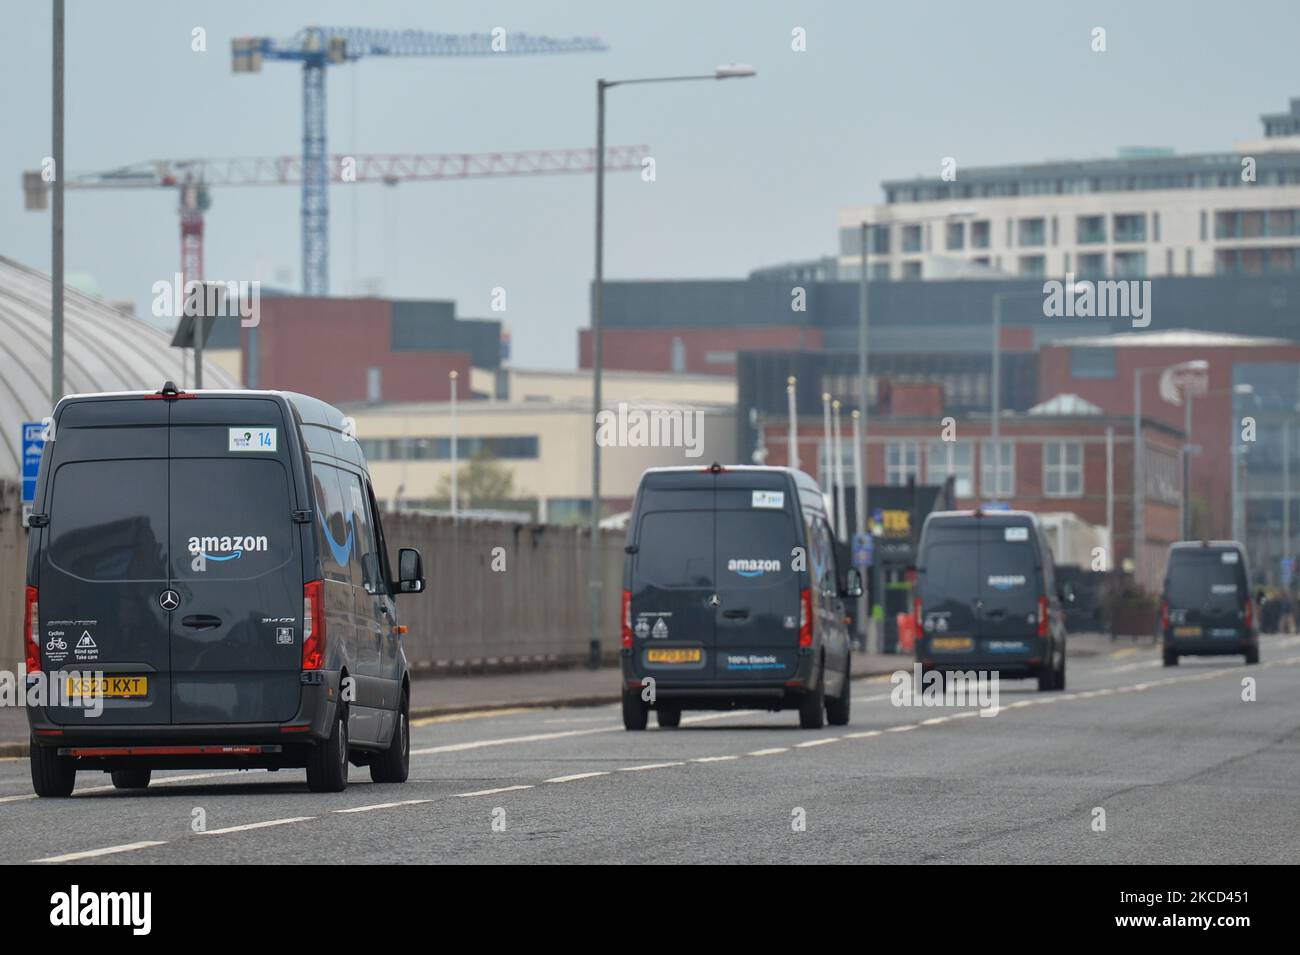 Amazon Prime vans seen in the Titanic Quarter in Belfast. Packages are shipped to the delivery station from Amazon fulfillment and sorting centers and loaded onto vehicles for delivery to Amazon customers in the Belfast area. On Tuesday, April 20, 2021, in Belfast, Northern Ireland. (Photo by Artur Widak/NurPhoto) Stock Photo